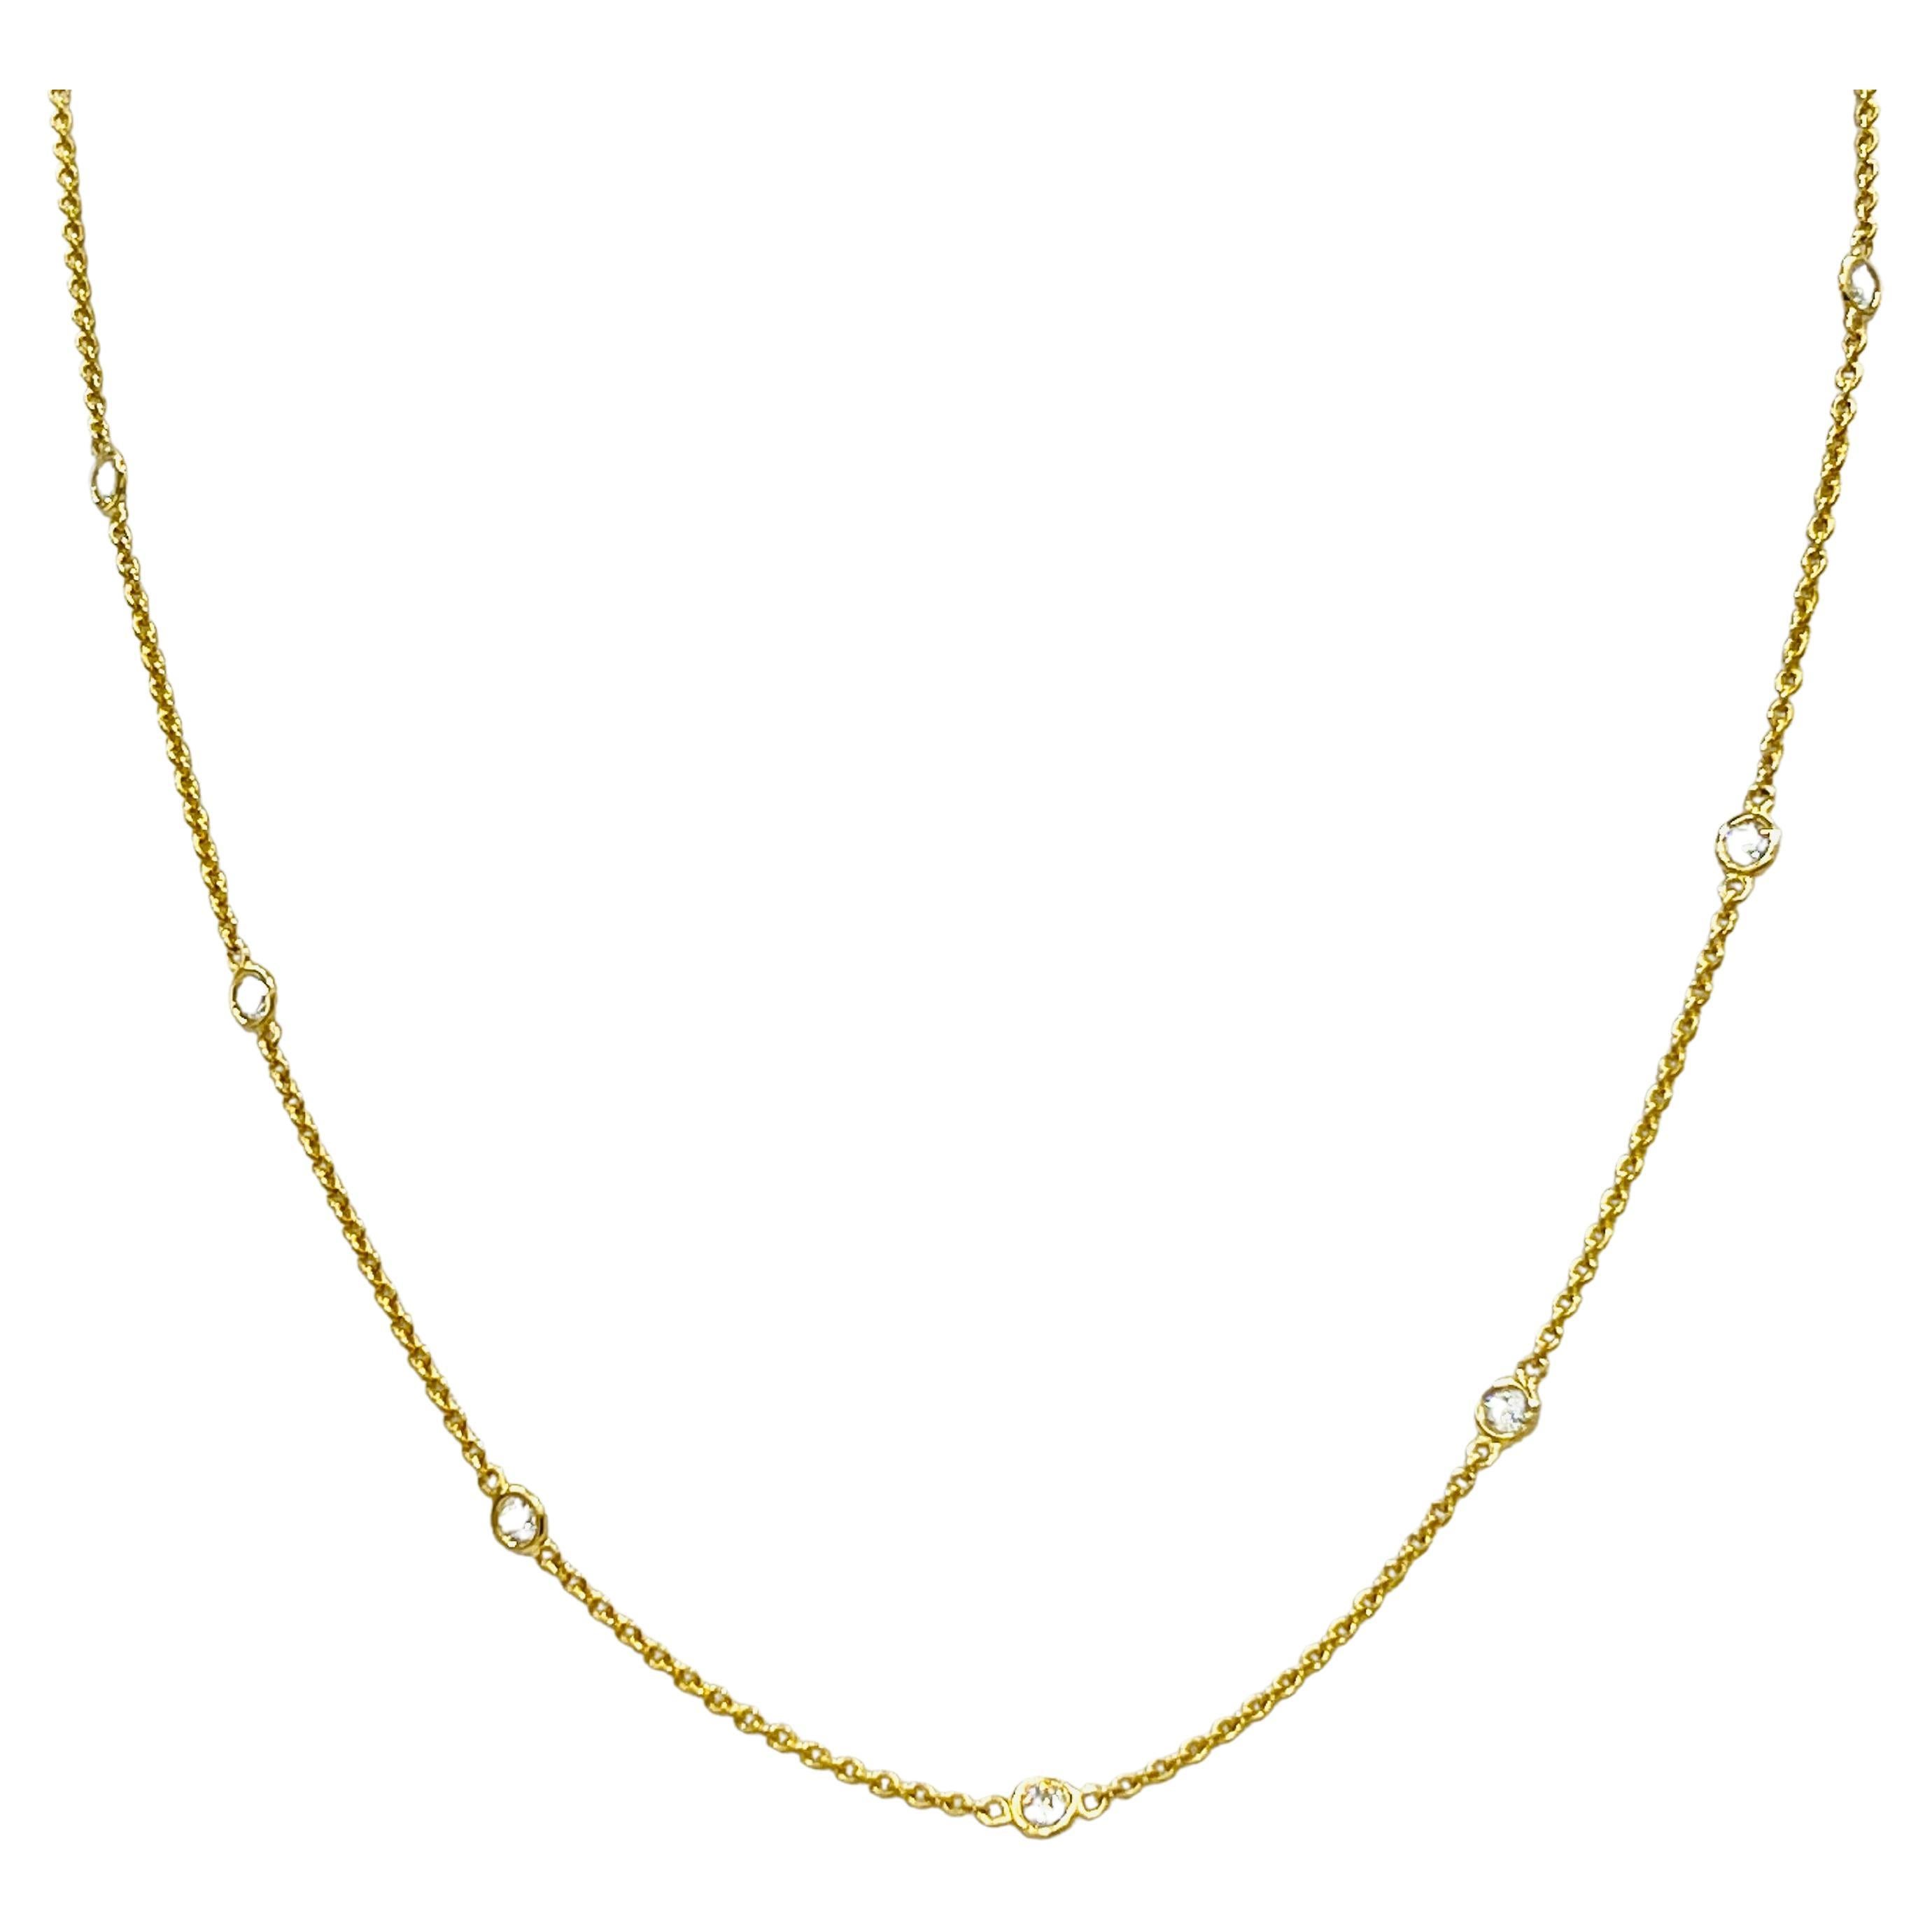 White Diamond and Chain Necklace in 14K Yellow Gold